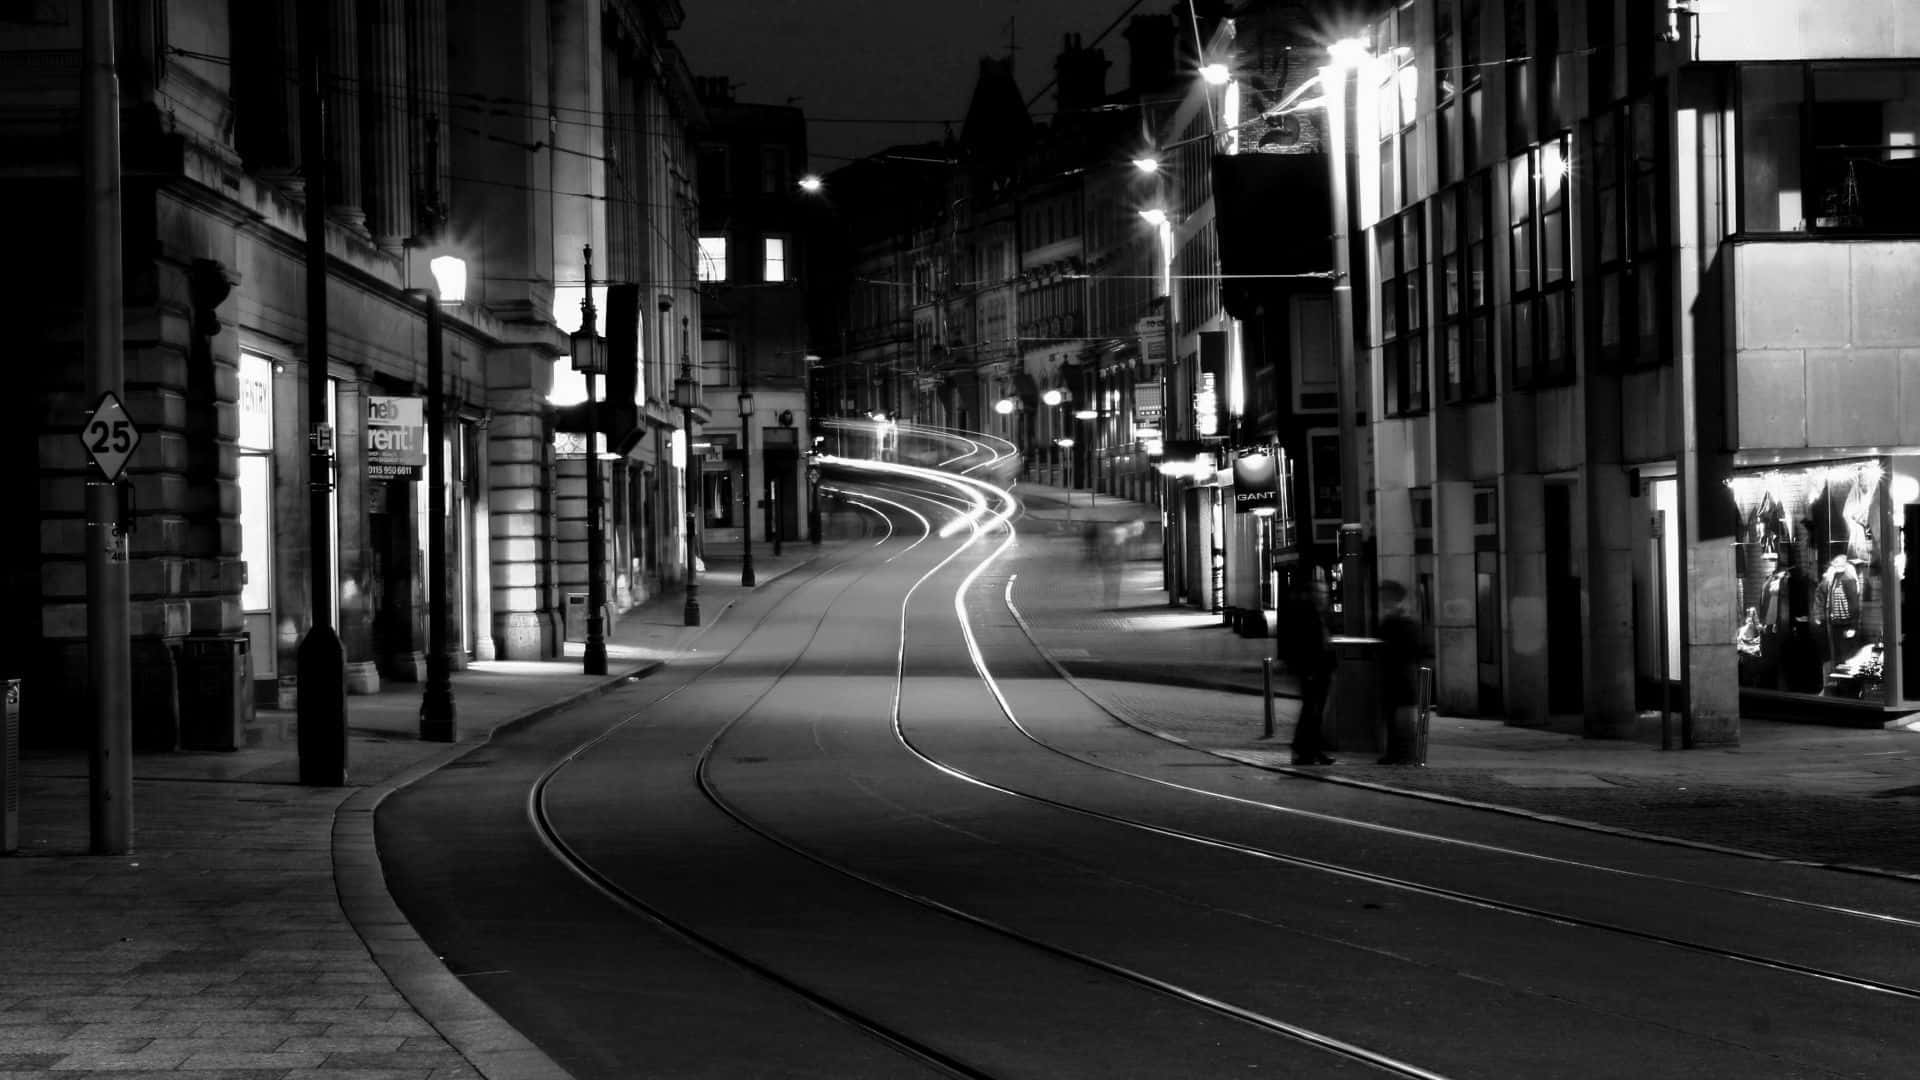 Monochrome urban cityscape with traffic lights and motion-blurred pedestrians Wallpaper